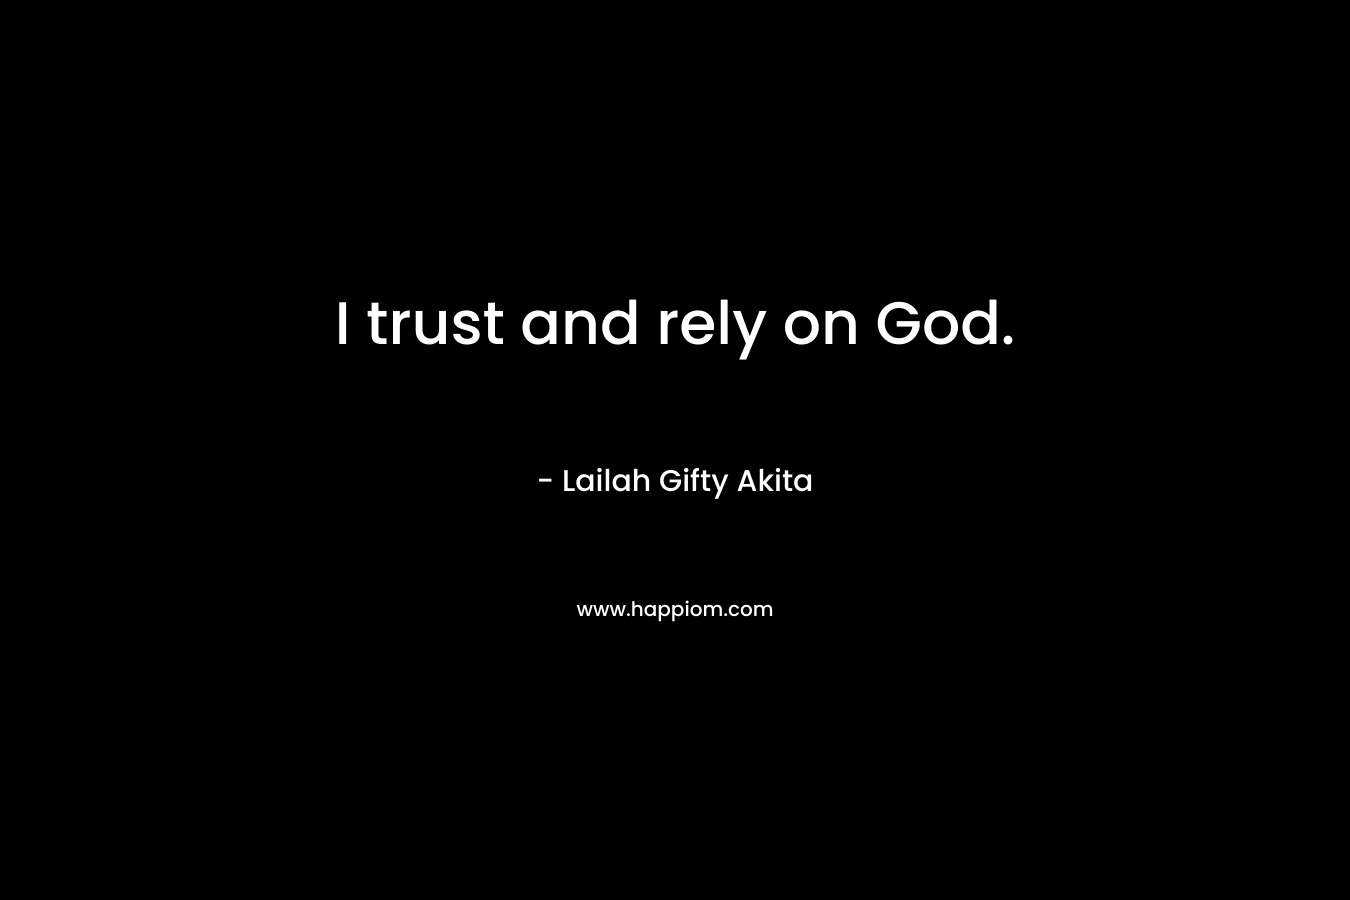 I trust and rely on God.